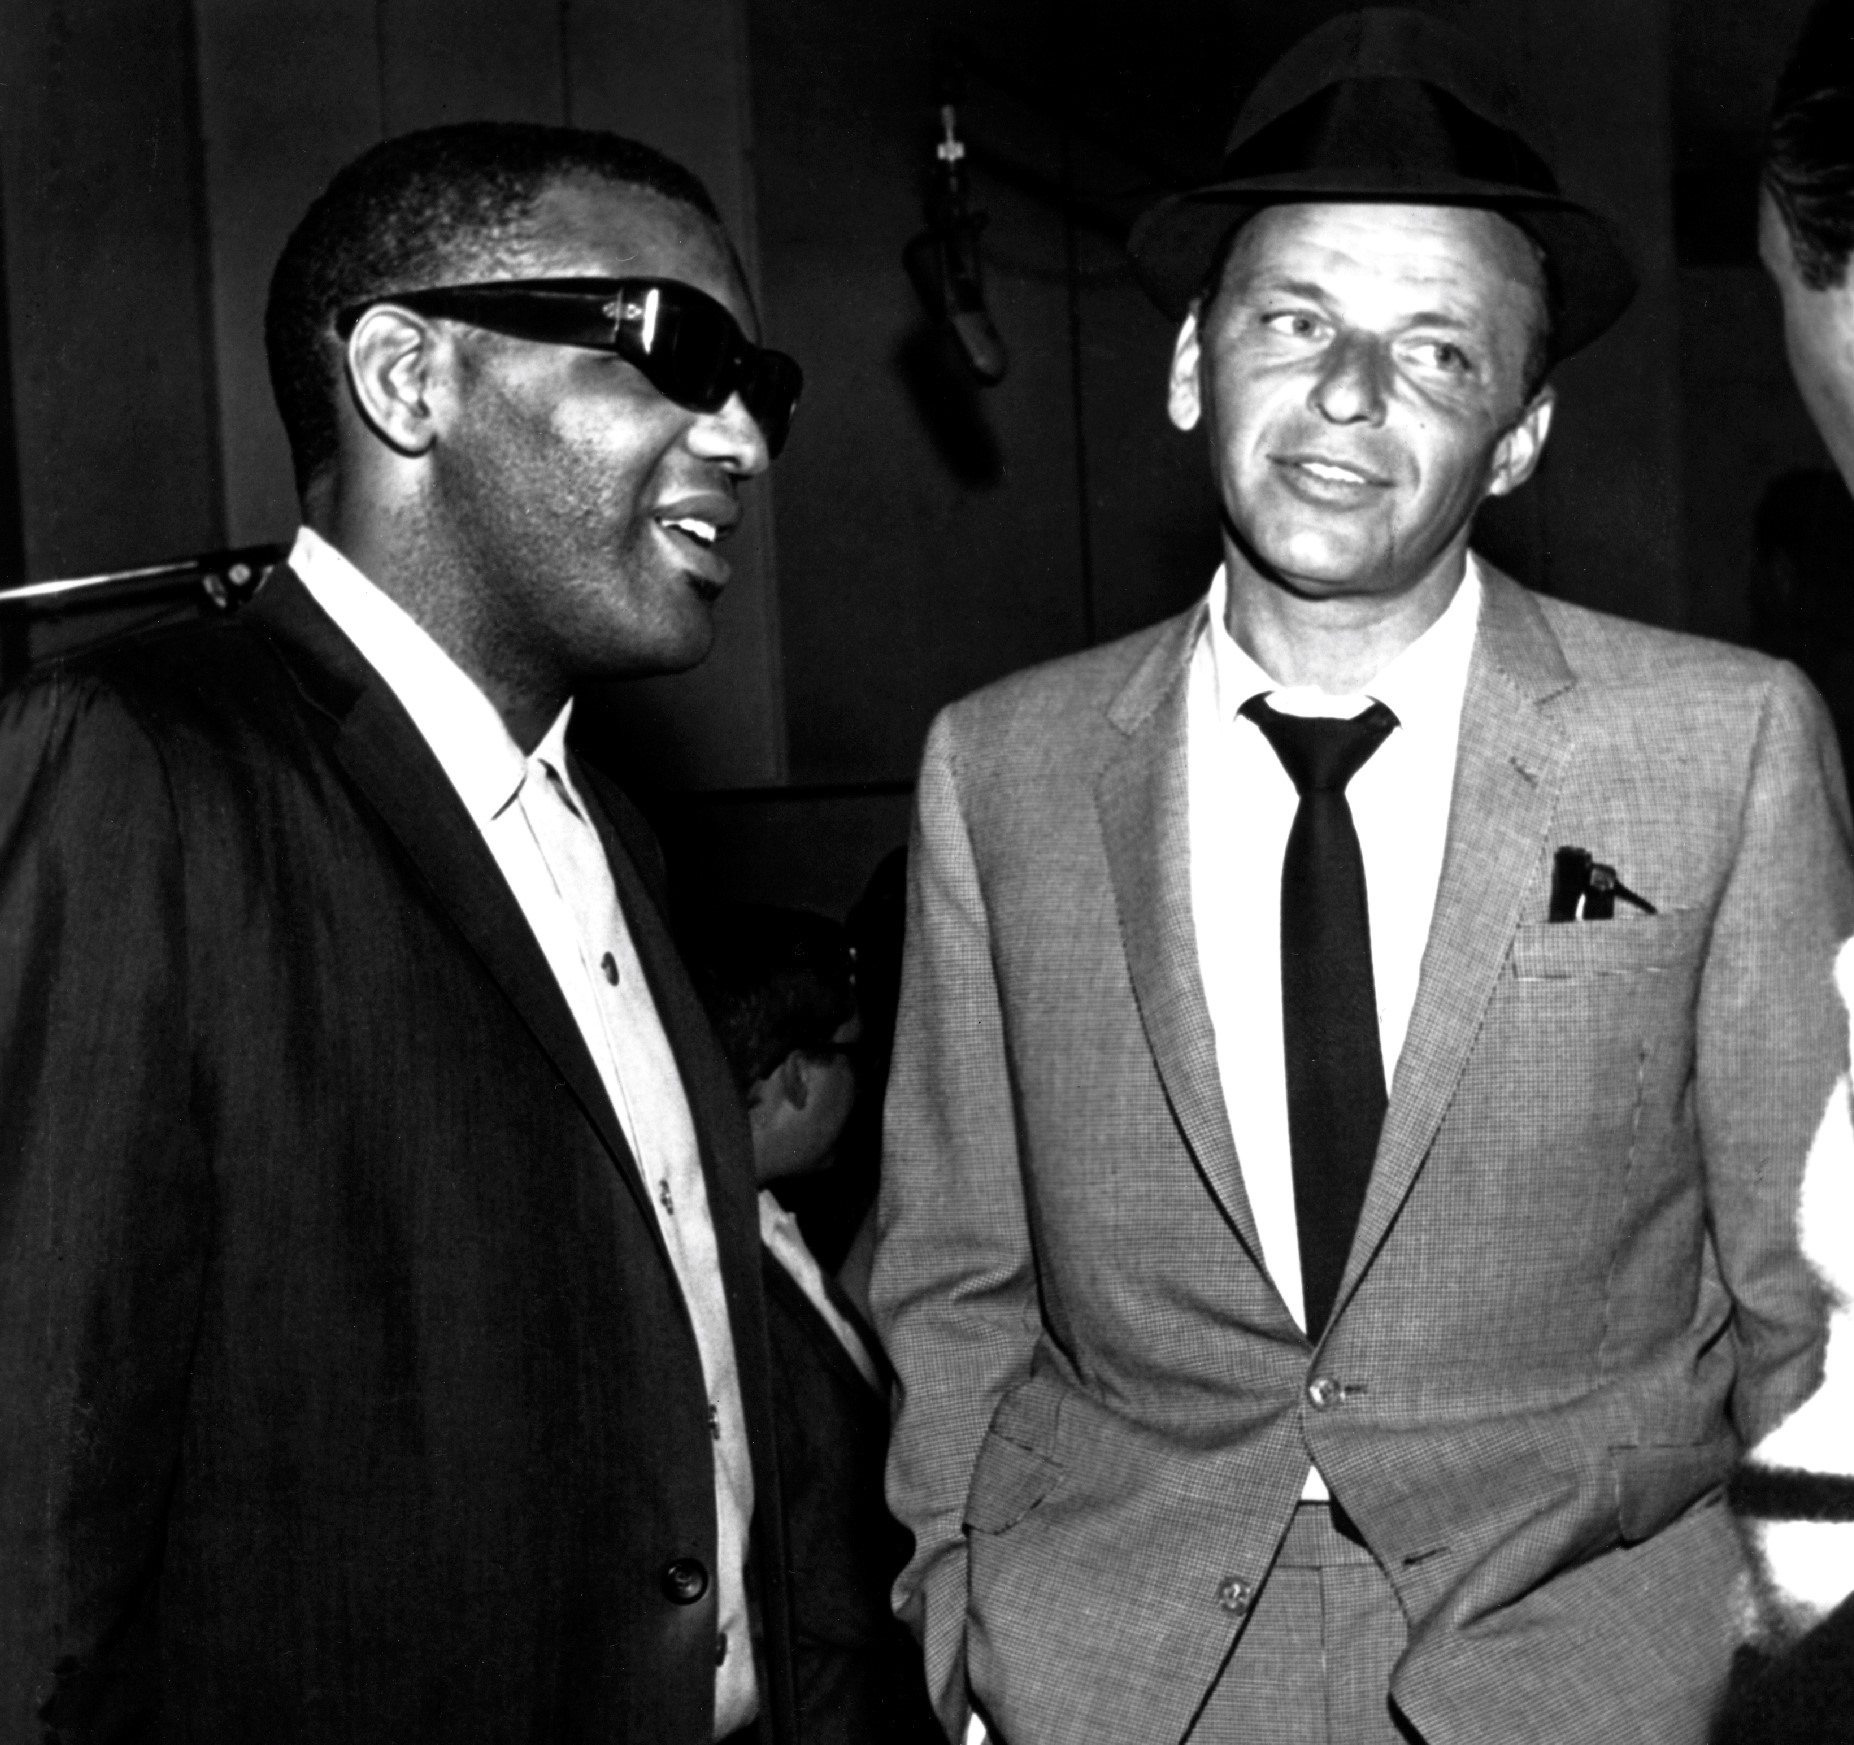 Ray Charles and Frank Sinatra wearing suits